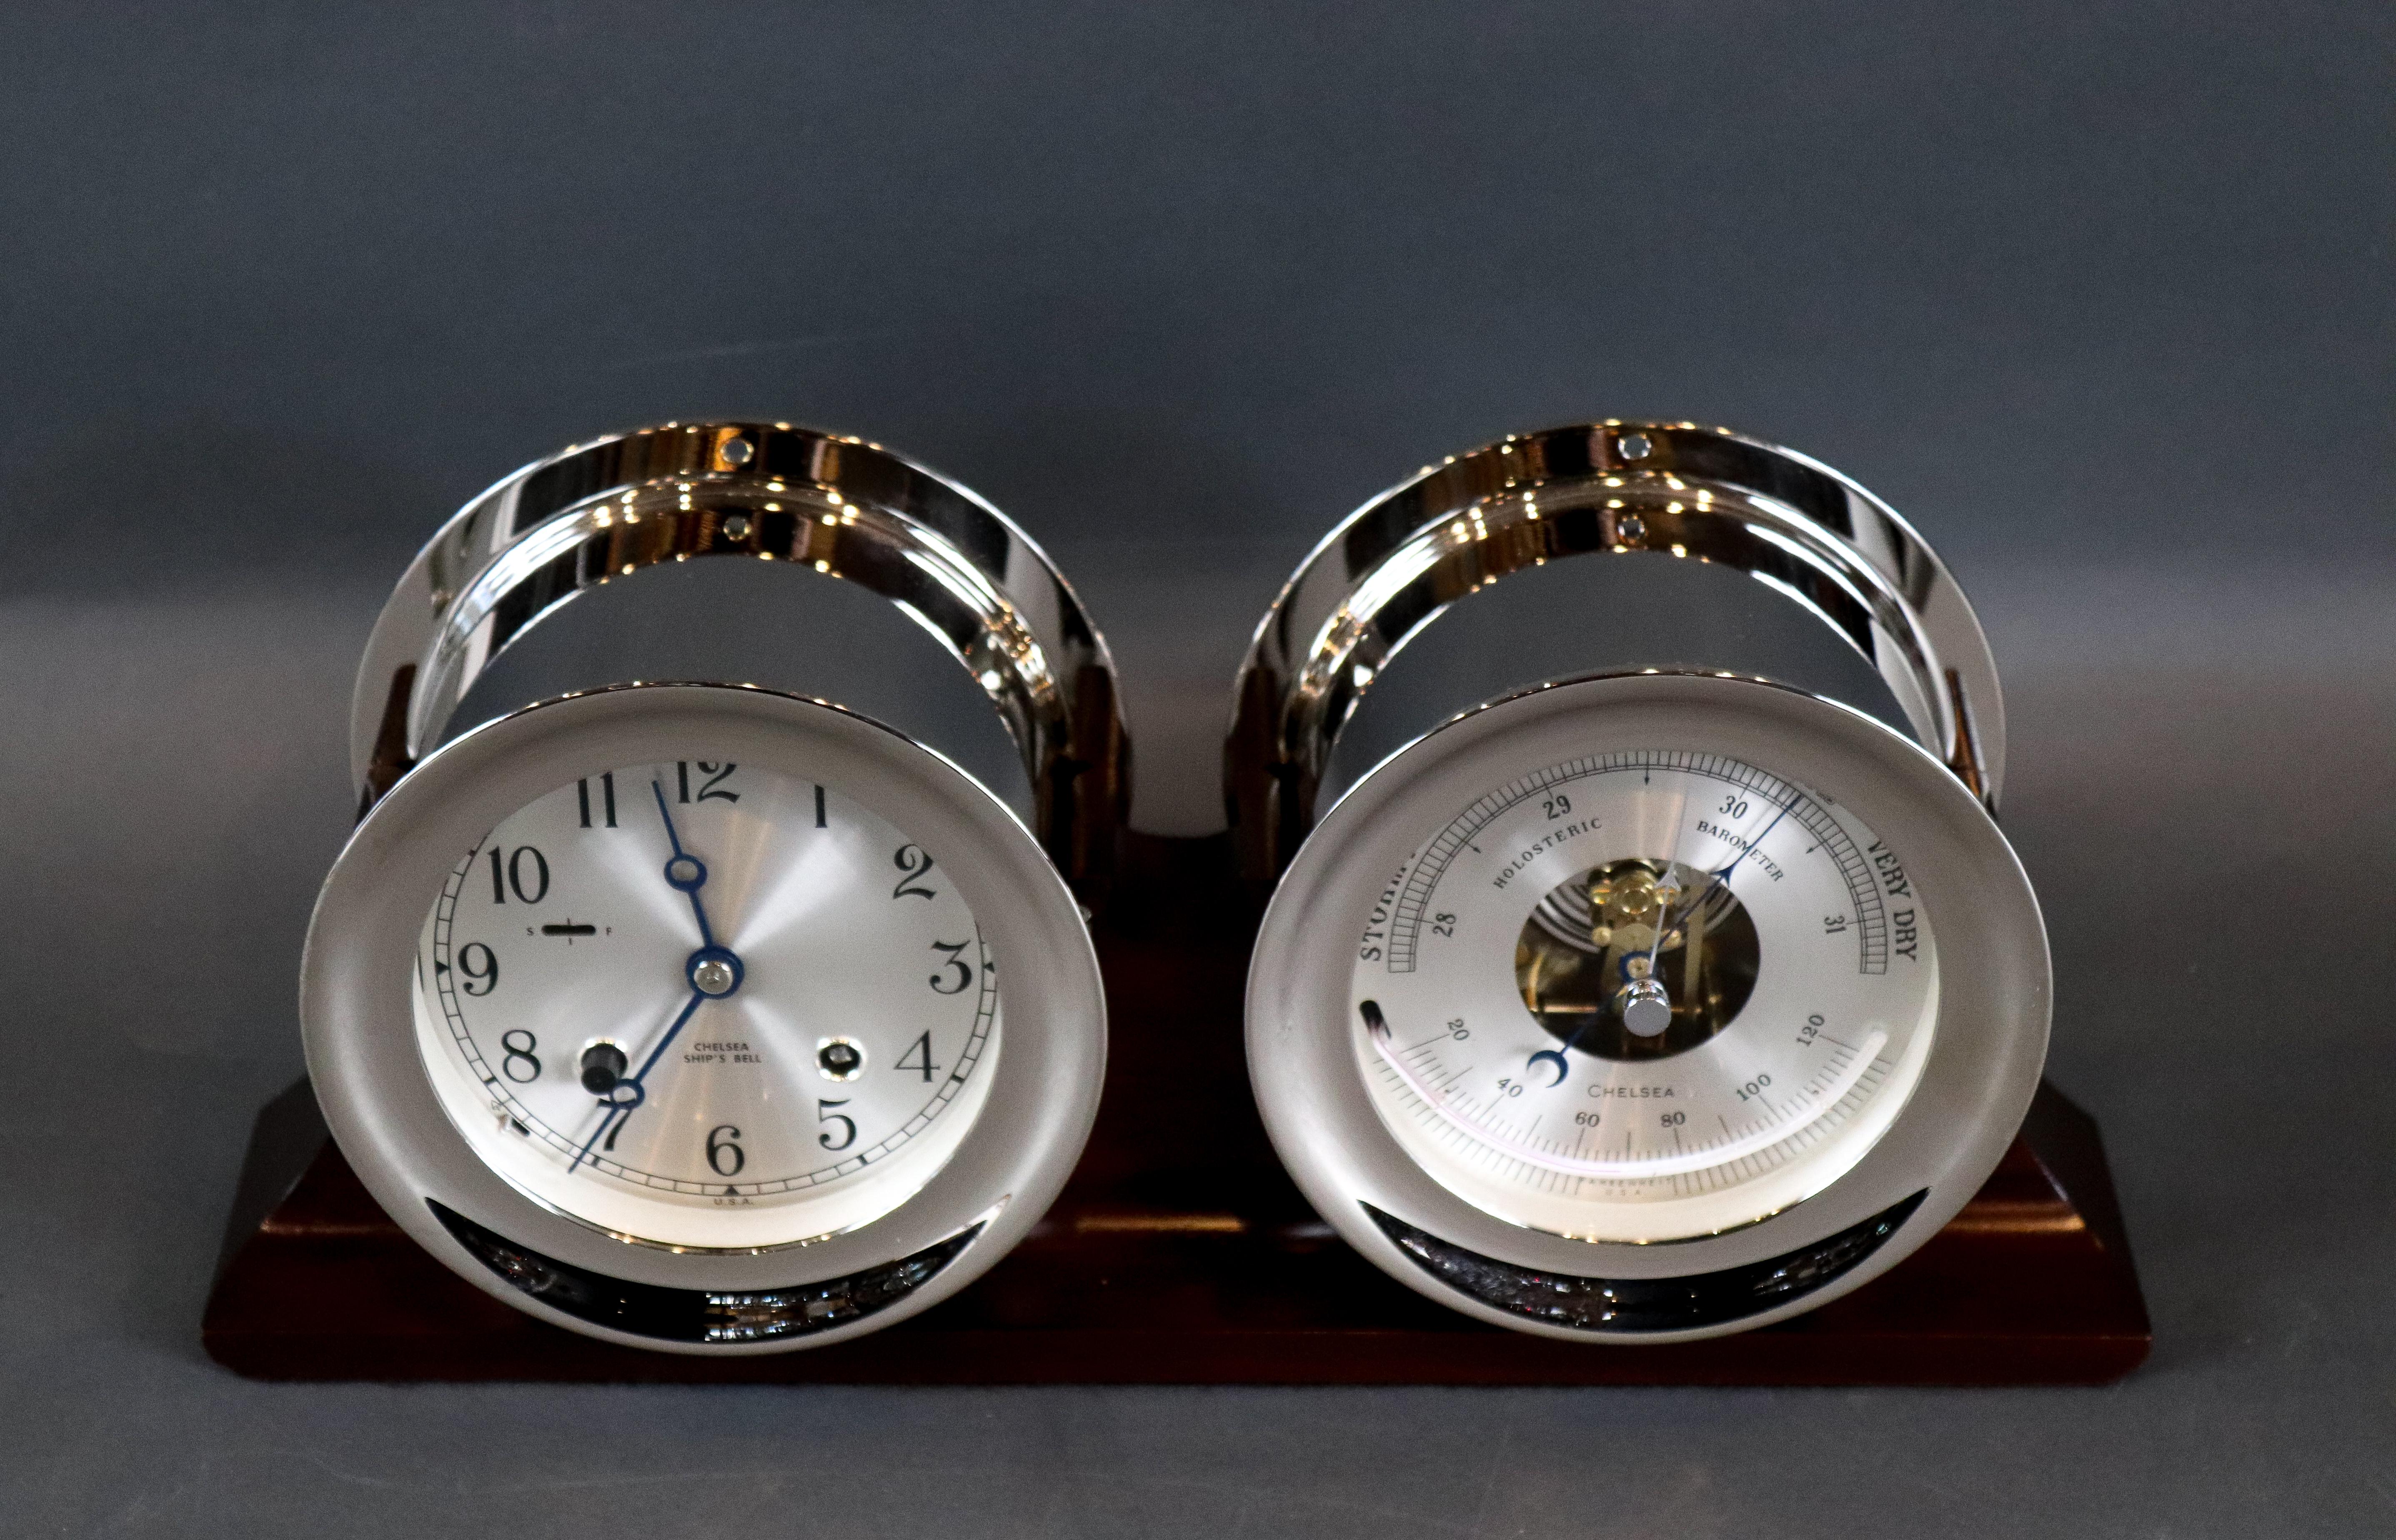 Chelsea ship's bell clock and barometer set mounted to a wood base. Nickel-plated over solid brass cases. Four inch faces. 14 1/2 x 4 x 7